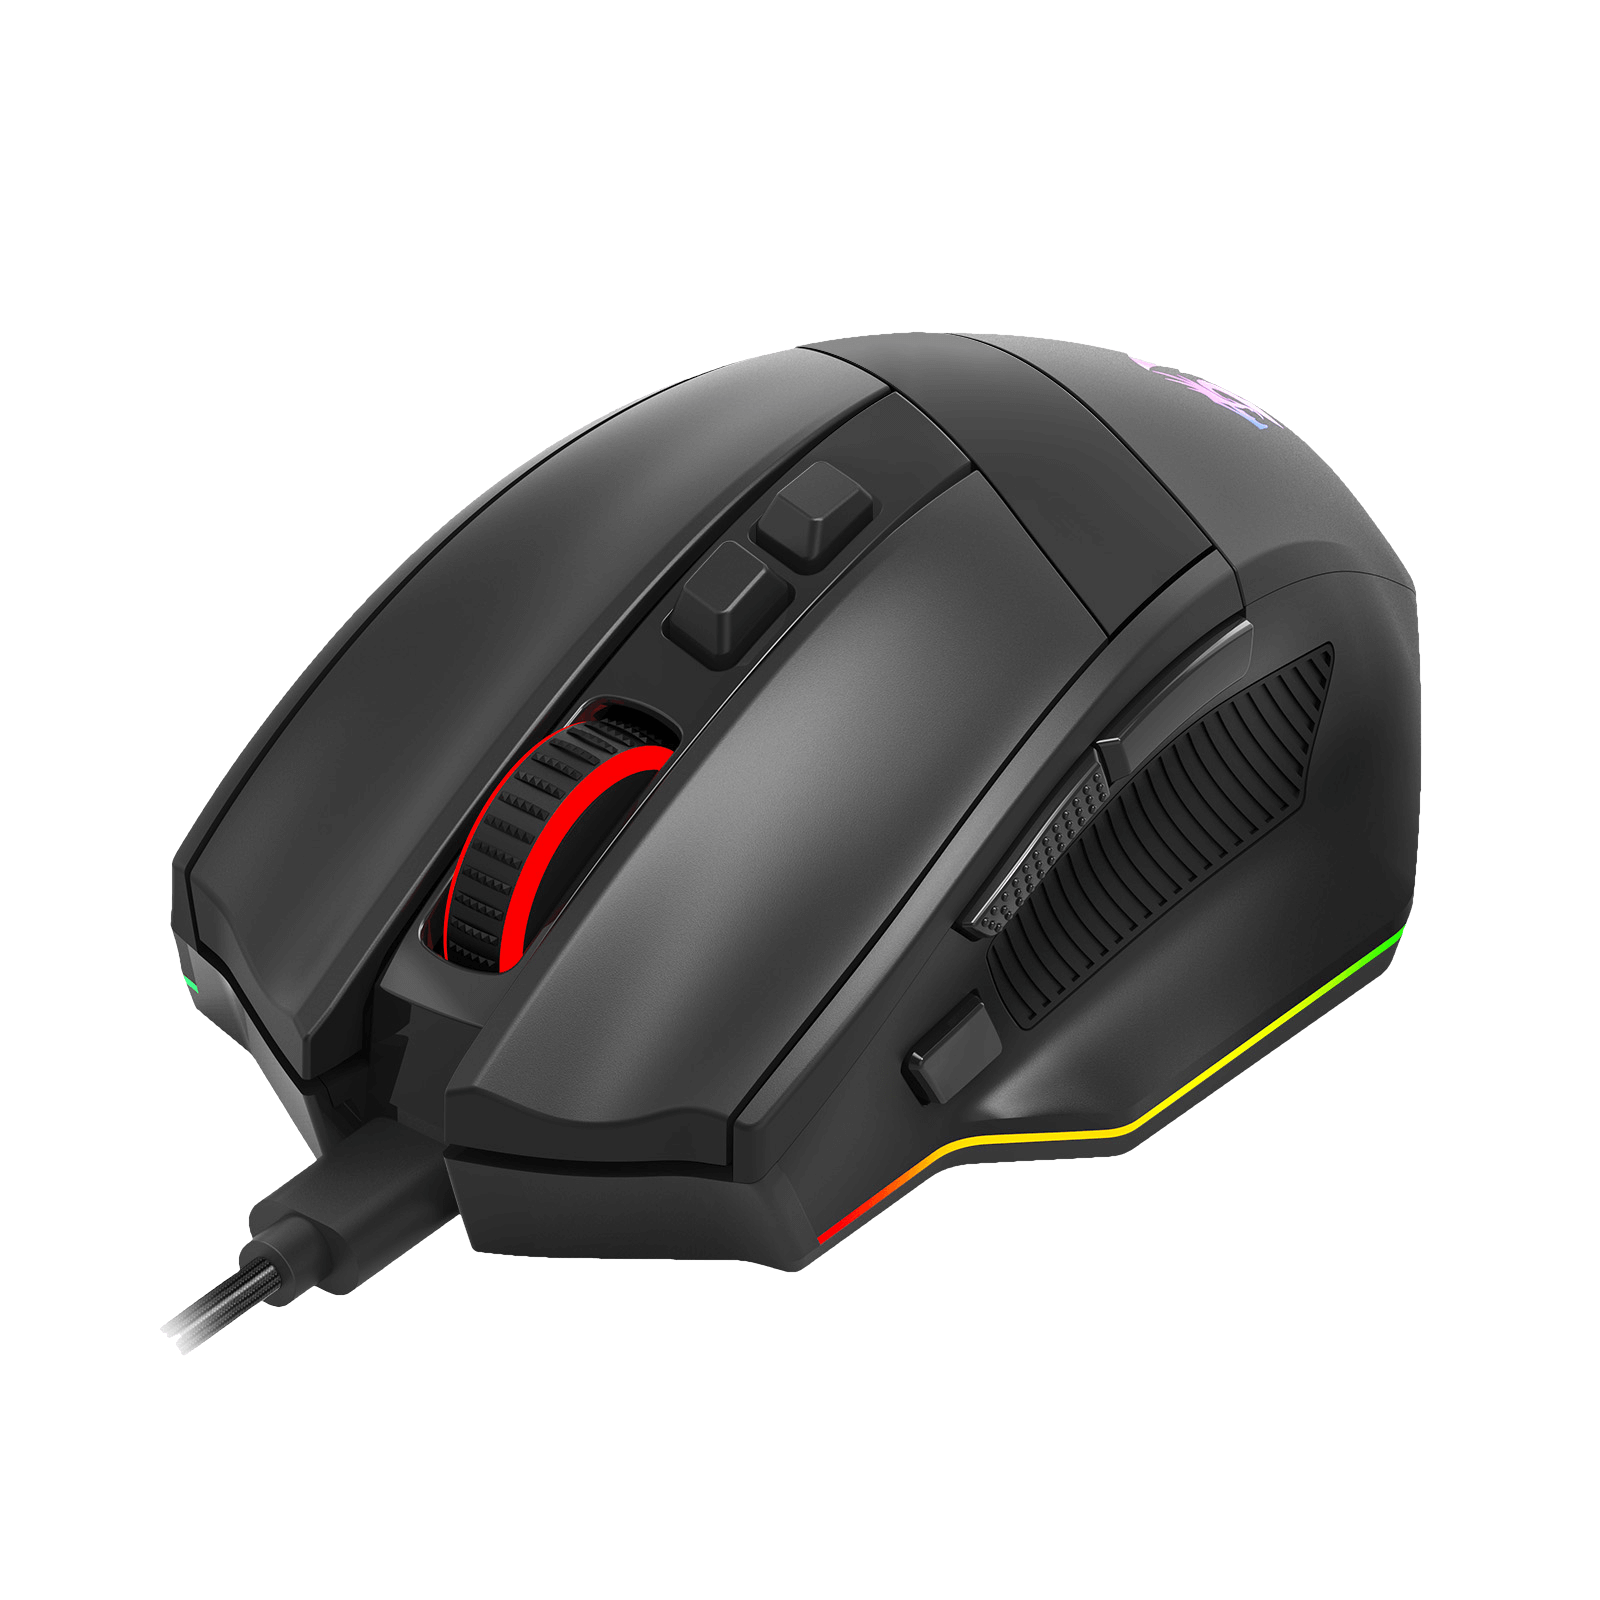 Redragon M813 Wired RGB Gaming Mouse with 4D Dual Mode Scroll Wheel, Optical Ergonomic Gamer Mouse with Max 16,000DPI, High Precision Sensor 3395, 7 Redefinable Macro Buttons, Software Supported